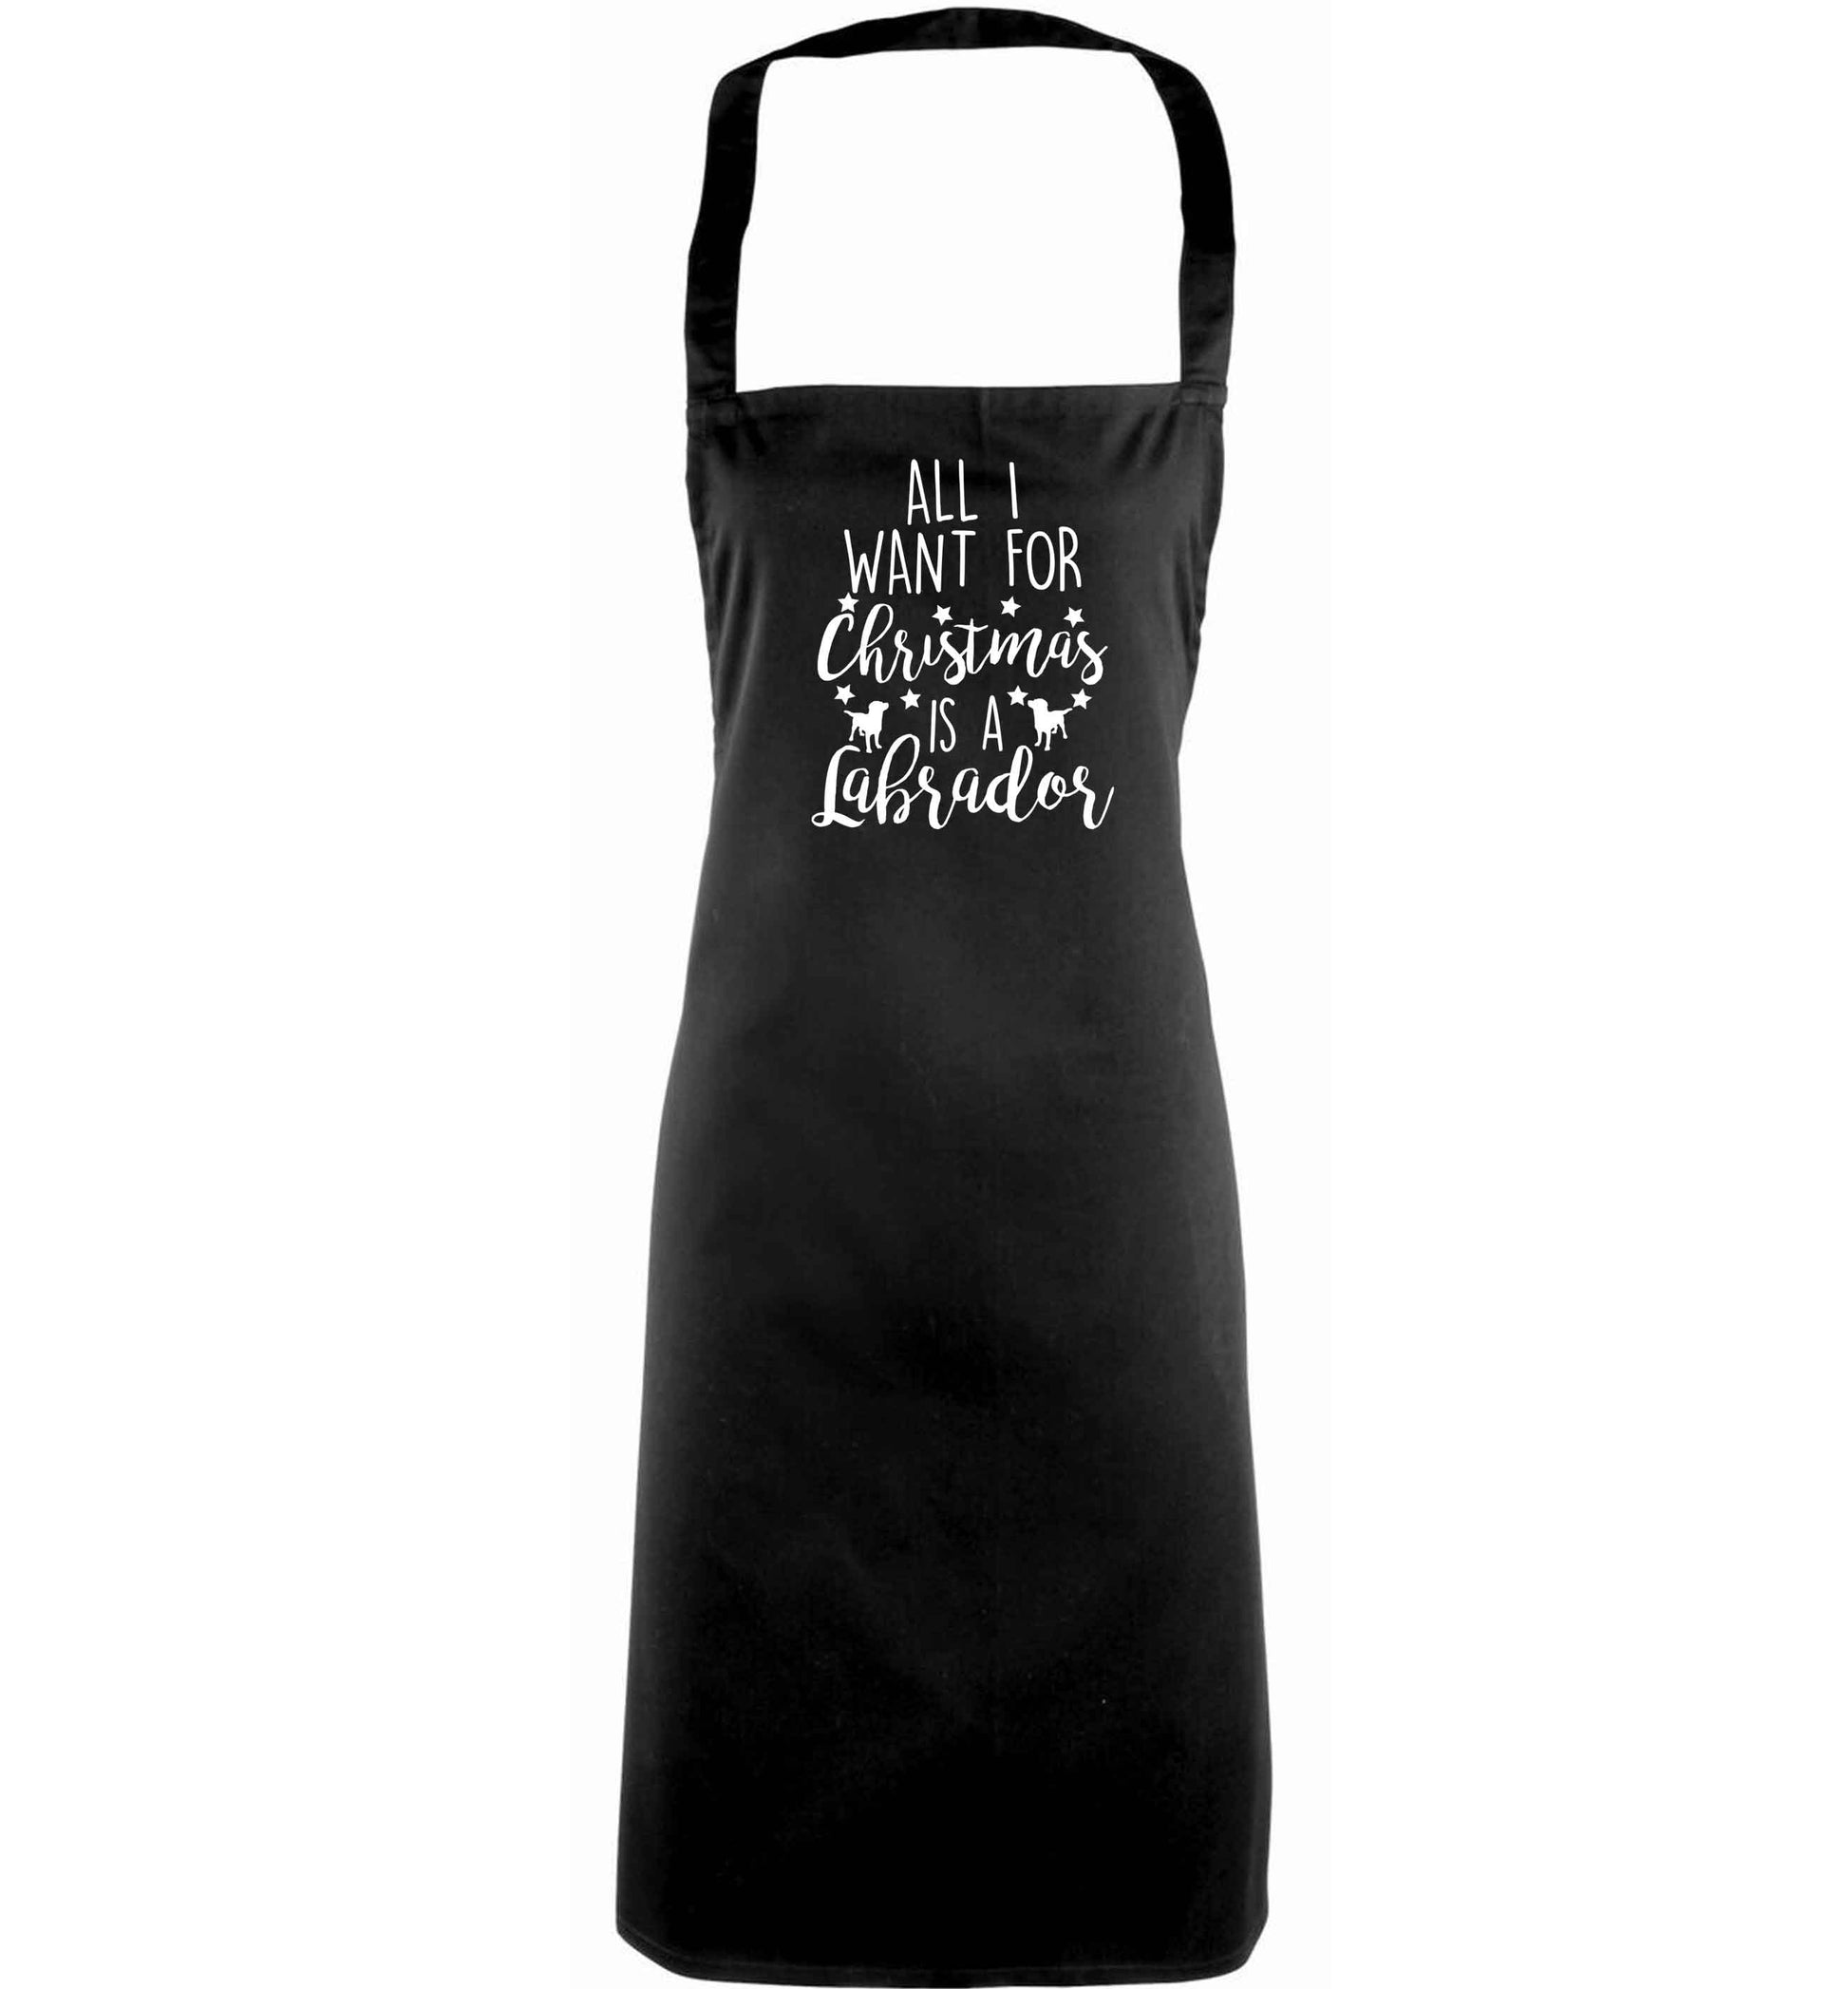 All I want for Christmas is a labrador adults black apron